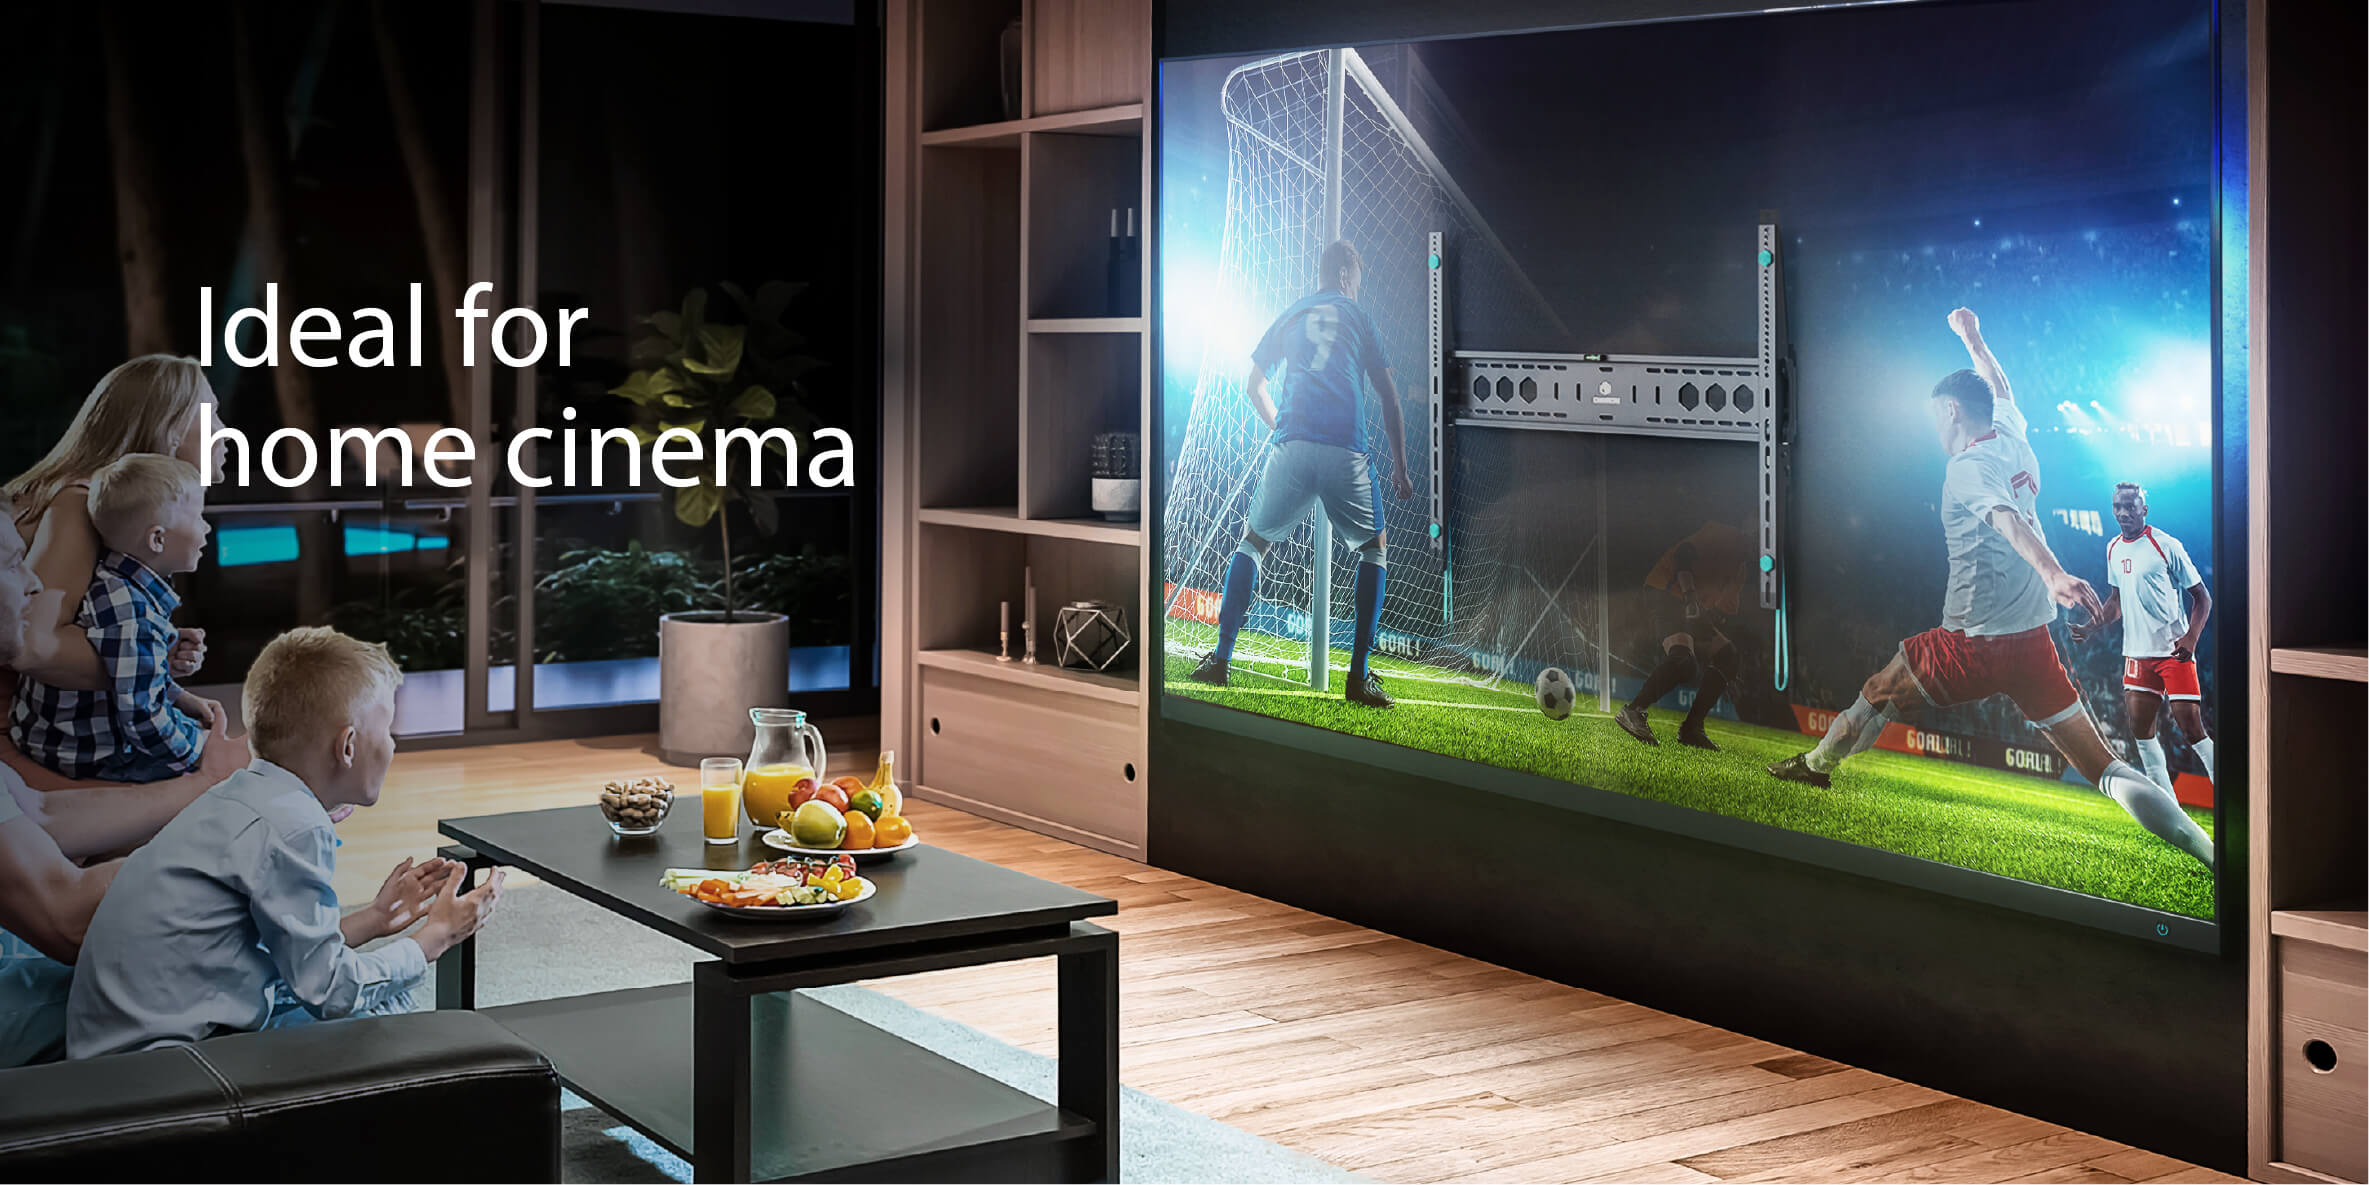 Ideal for home cinema